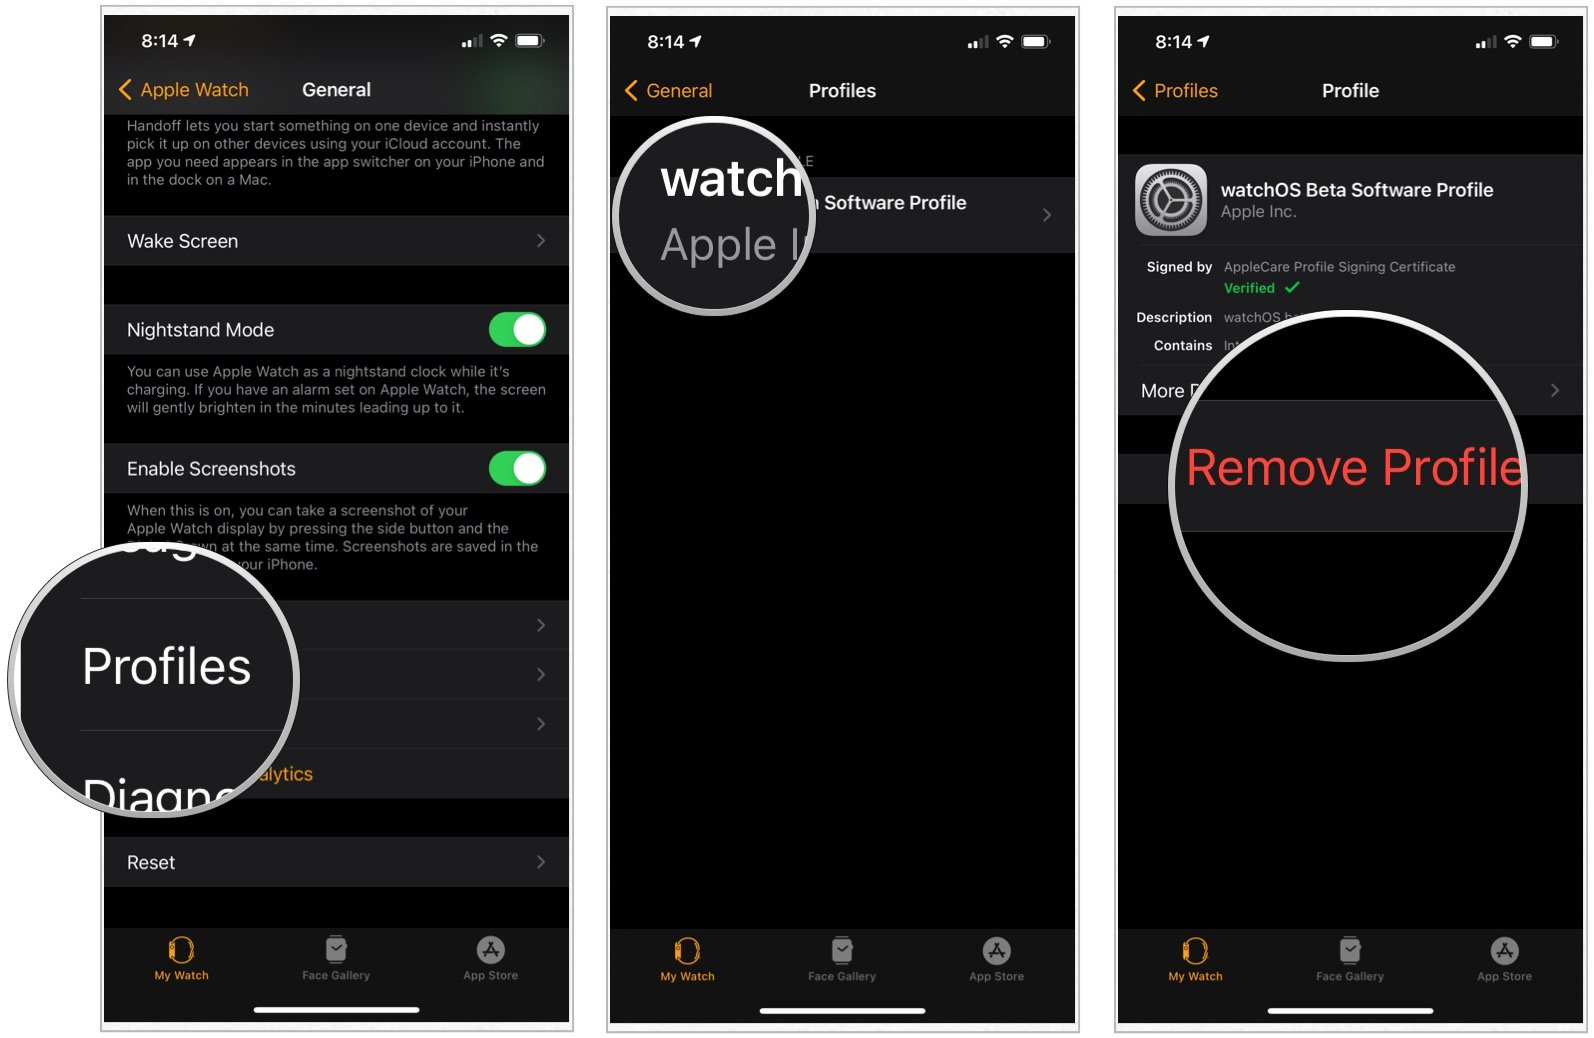 To remove the beta profile from your Apple Watch, select Profiles, then tap watchOS Beta Software Profile. Choose Remove Profile.